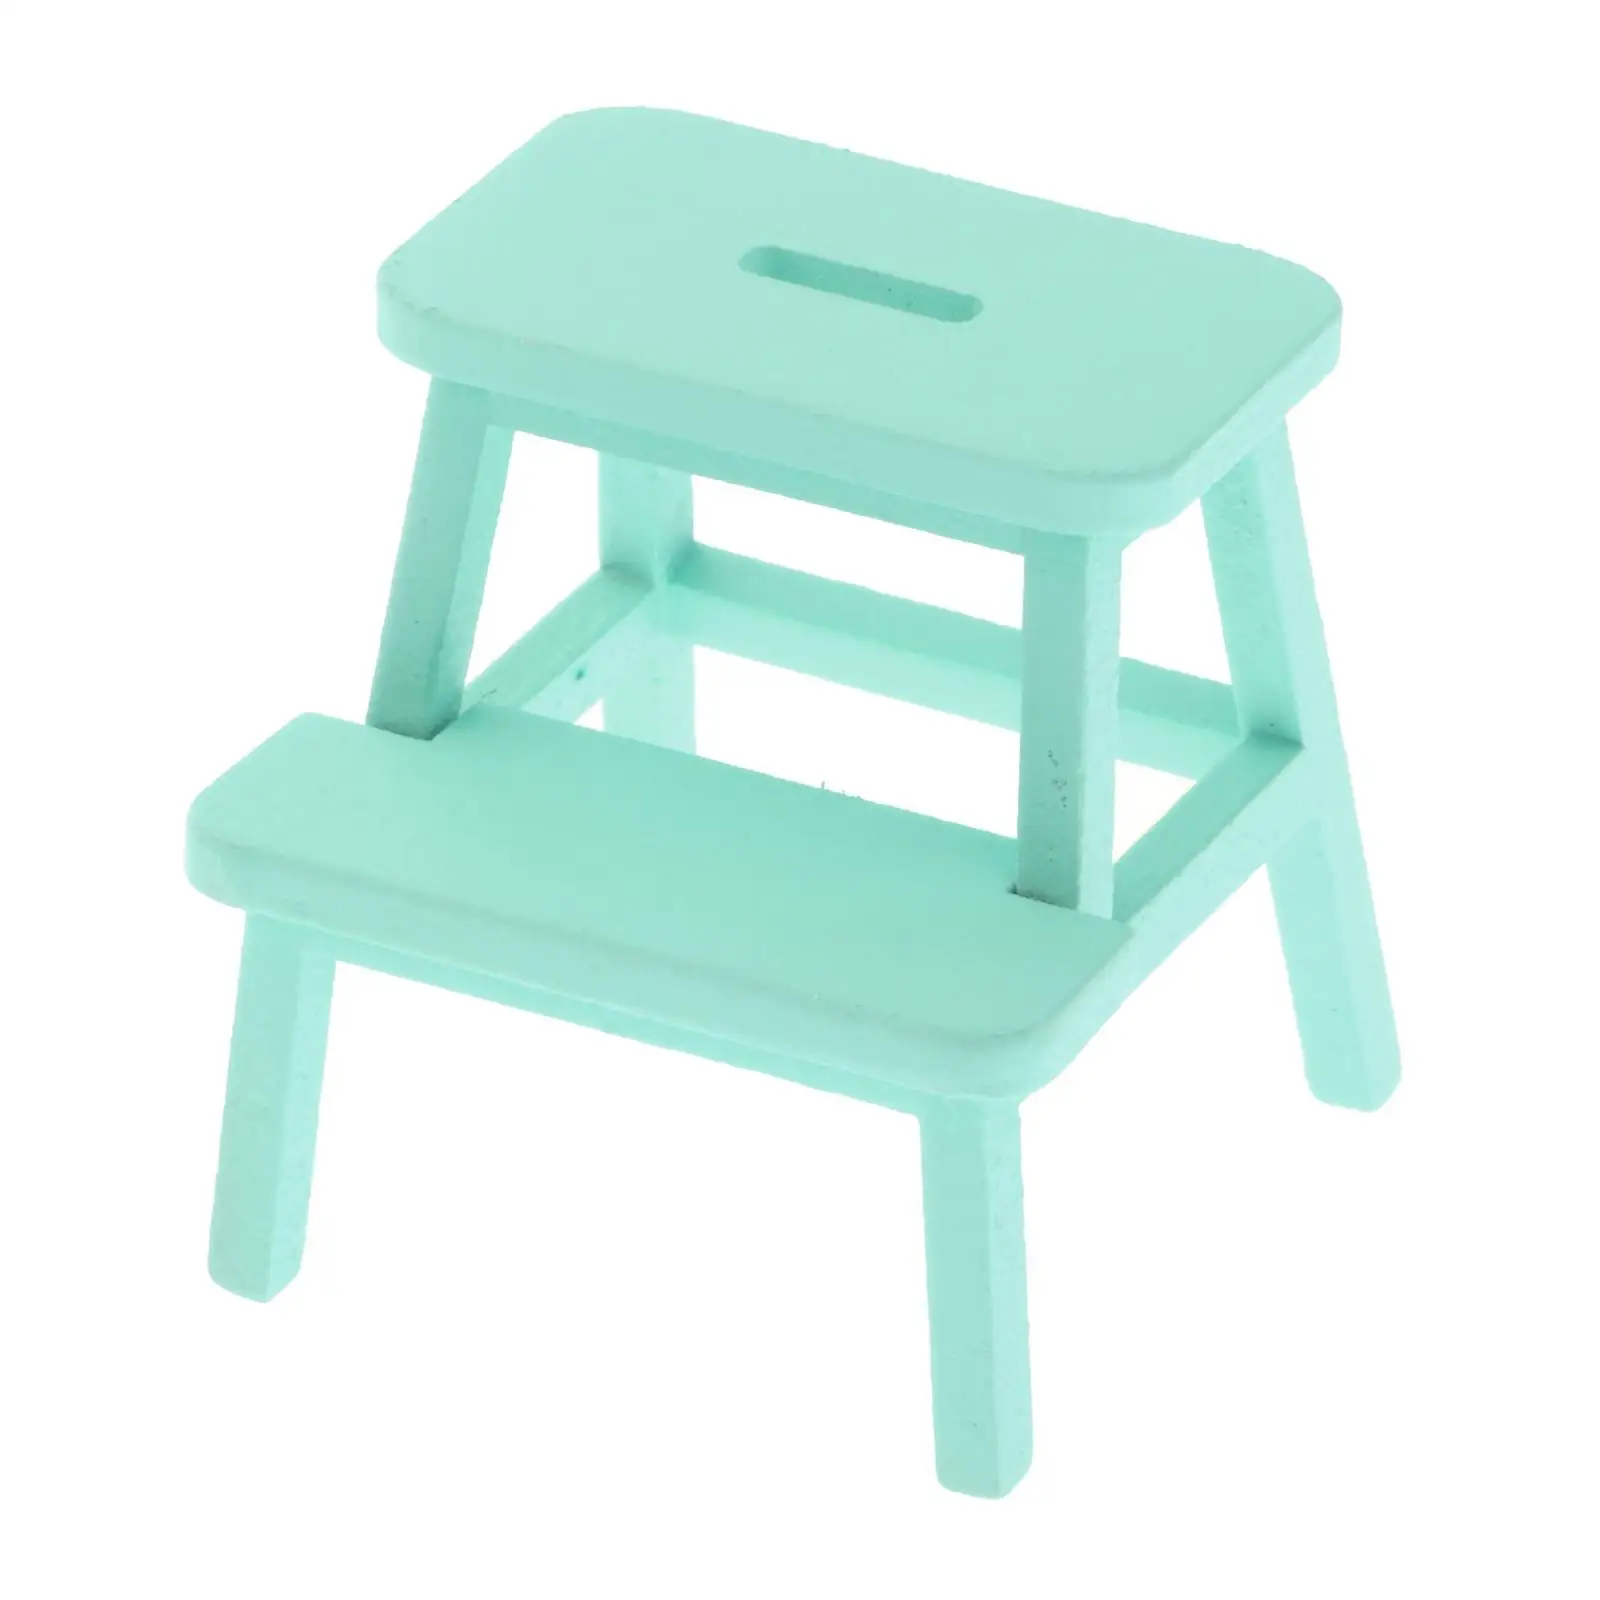 1:12 Scale Dollhouse Step Chair Handpainted Accessory DIY Decoration Two Step Stool Miniature for Doll House Bedroom Kitchen